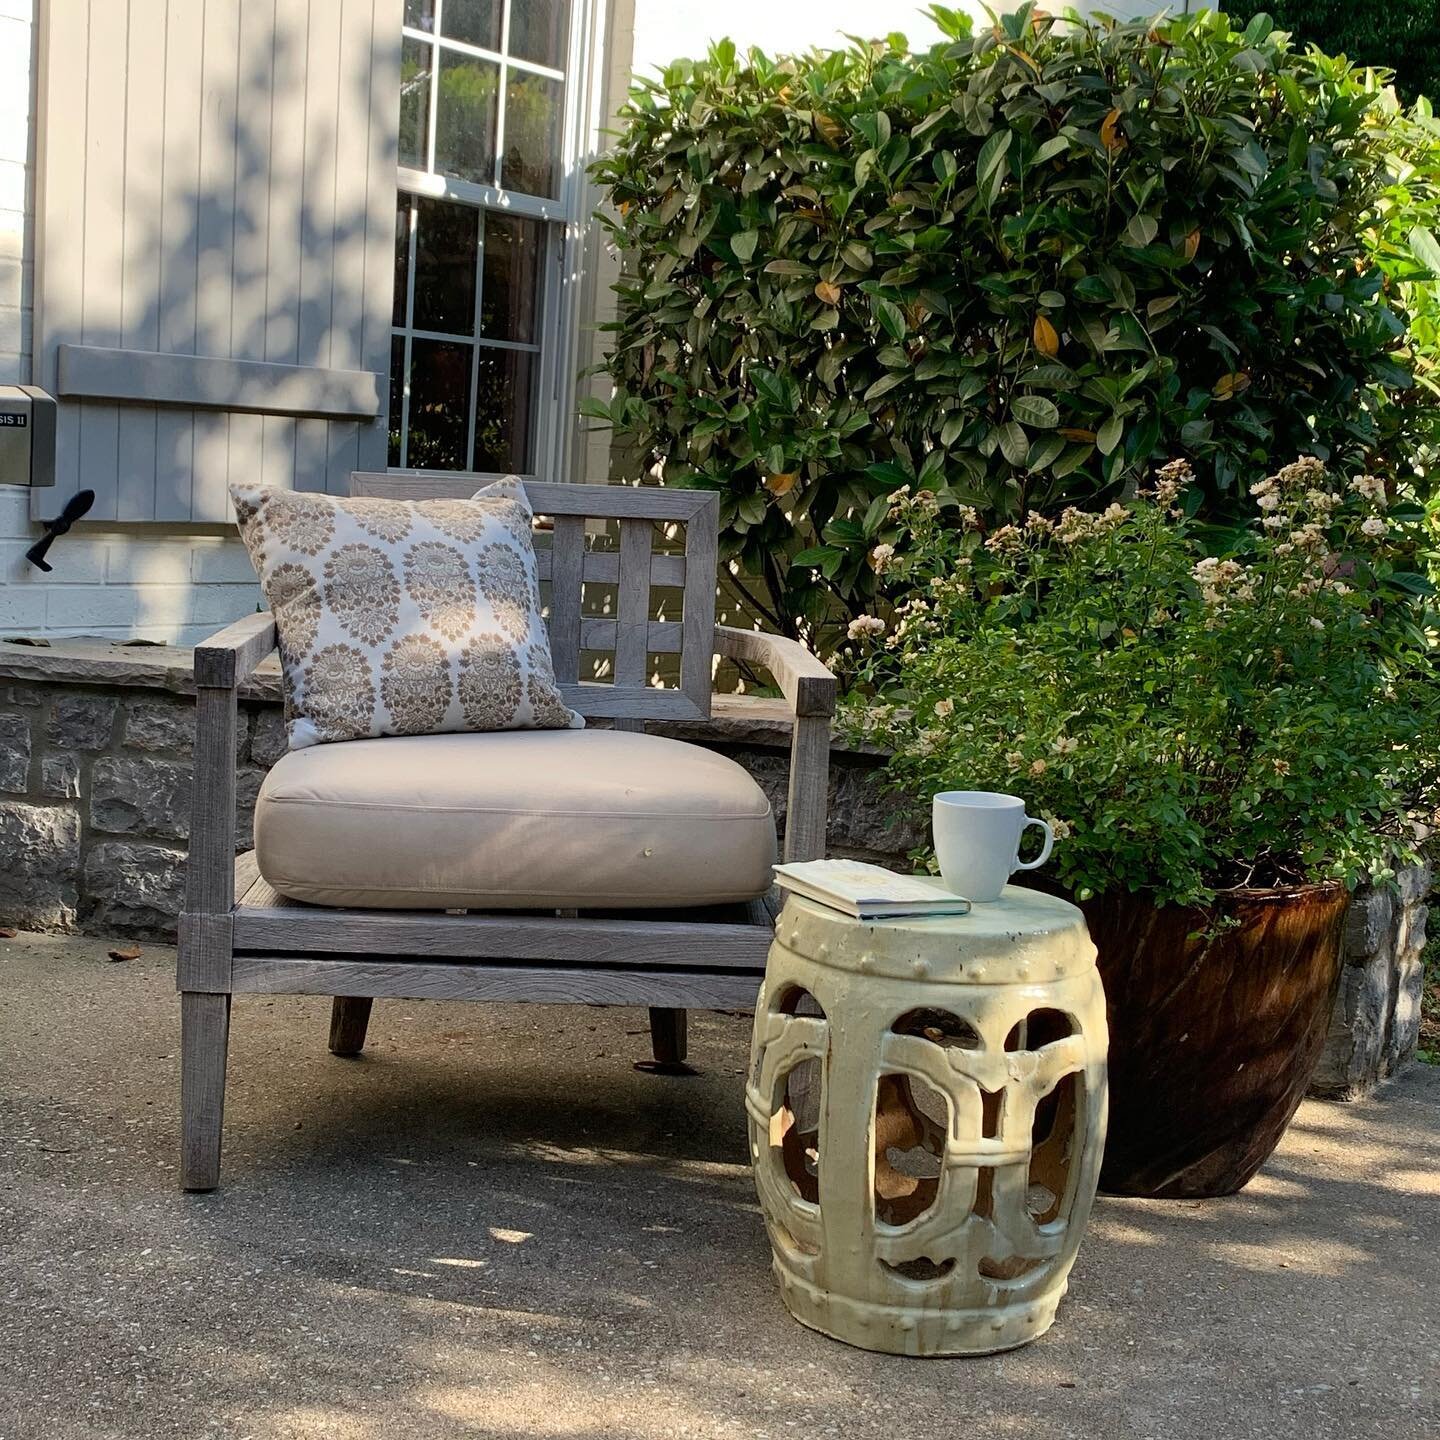 Happy Memorial Day! Filling my cup with an attitude of gratitude on this beautiful morning for all the brave women and men who served our country. Thank you for your service. 
.
.
.
#summerliving #gardens #roses #gardenstools ##teakfurniture #stonewa